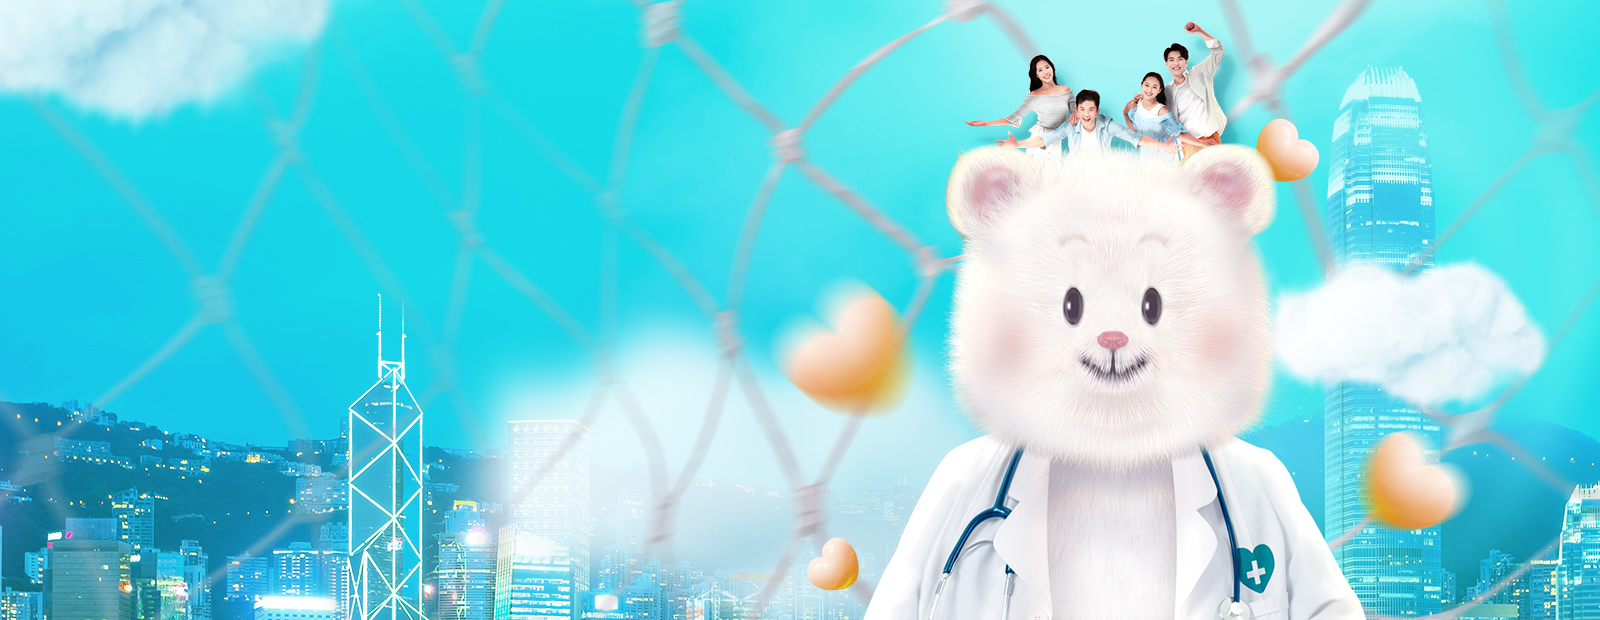 Dr Bear Wanted!“616 Client’s Day” Special Campaign